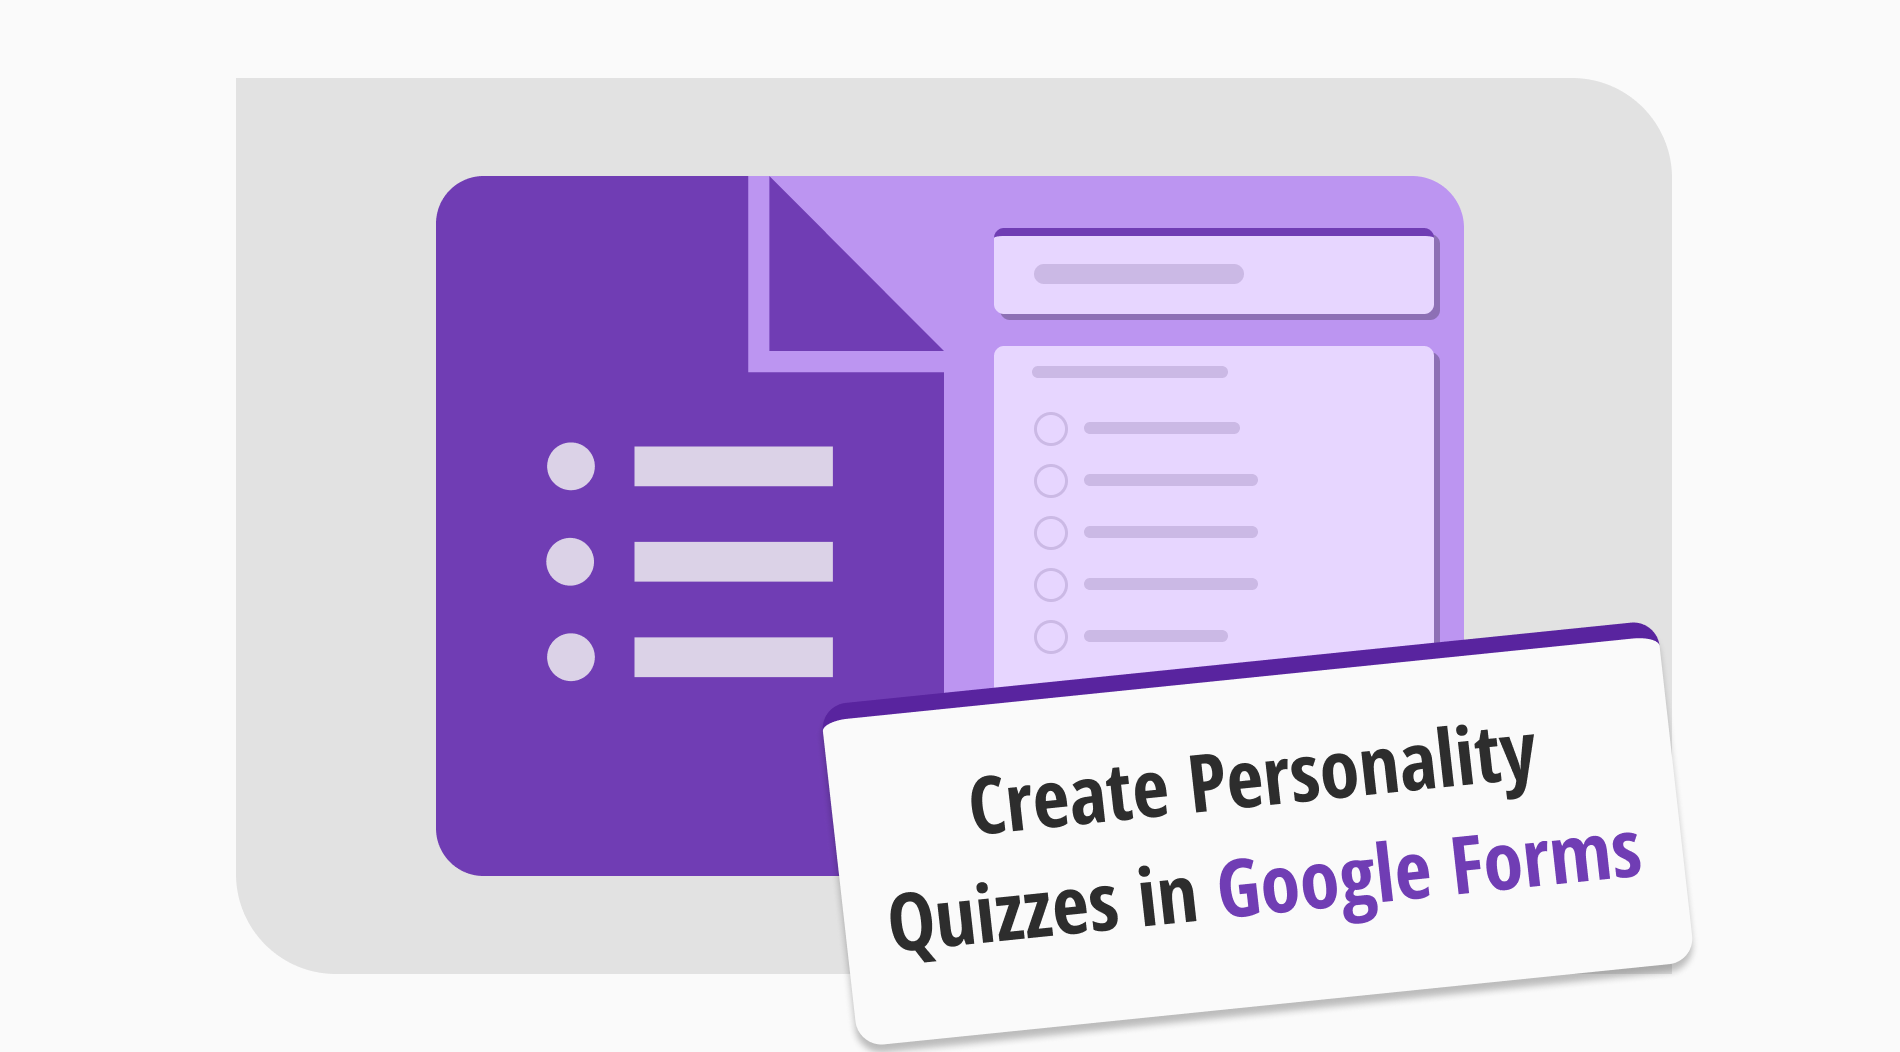 How to create personality quizzes in Google Forms (step-by-step)